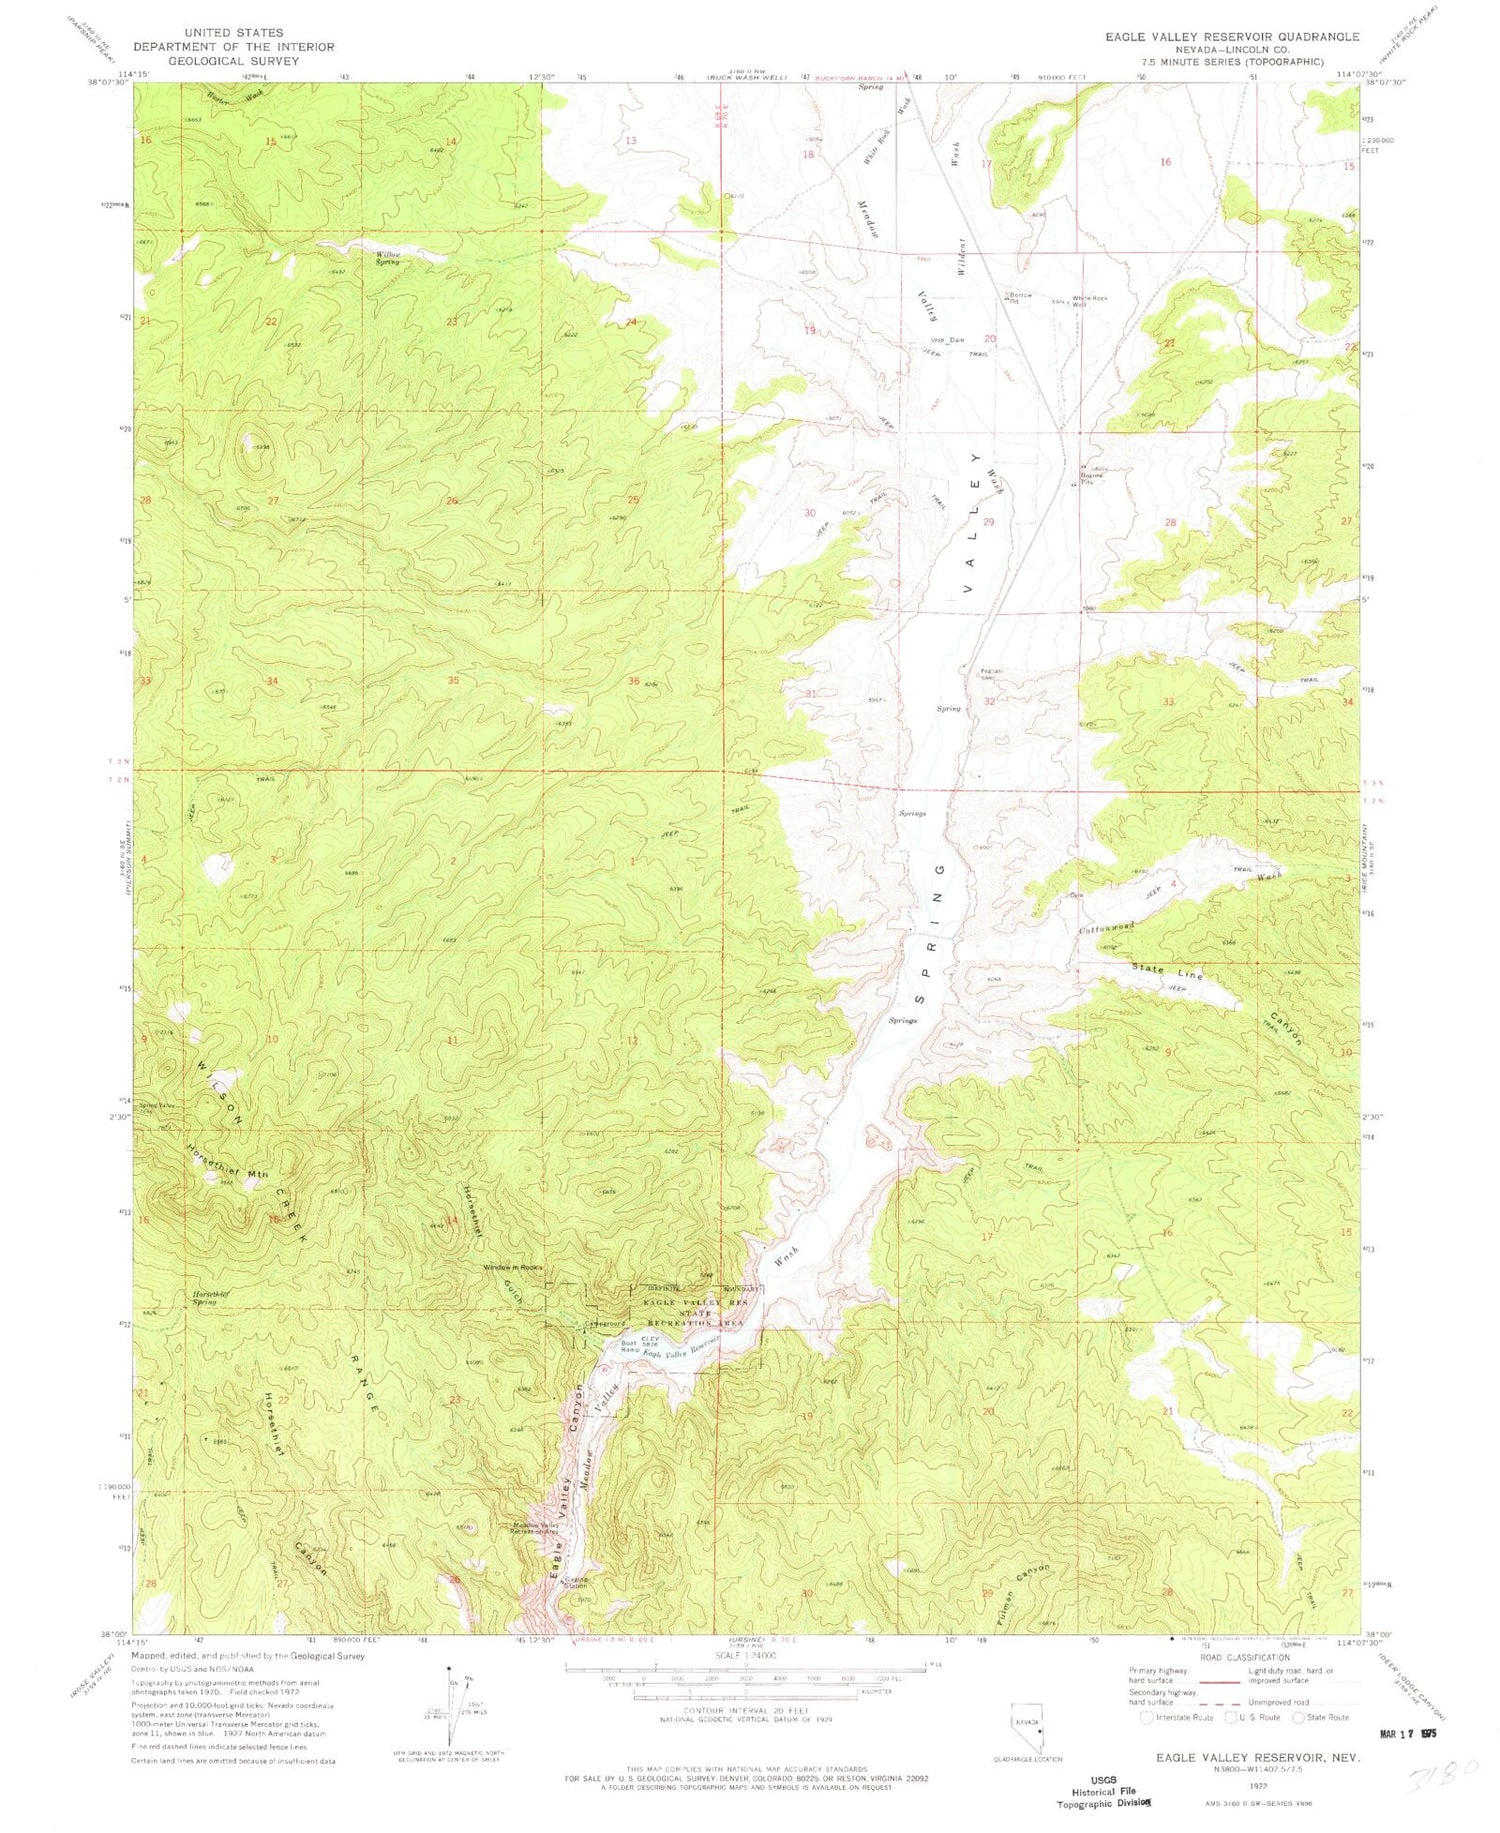 Classic USGS Eagle Valley Reservoir Nevada 7.5'x7.5' Topo Map Image